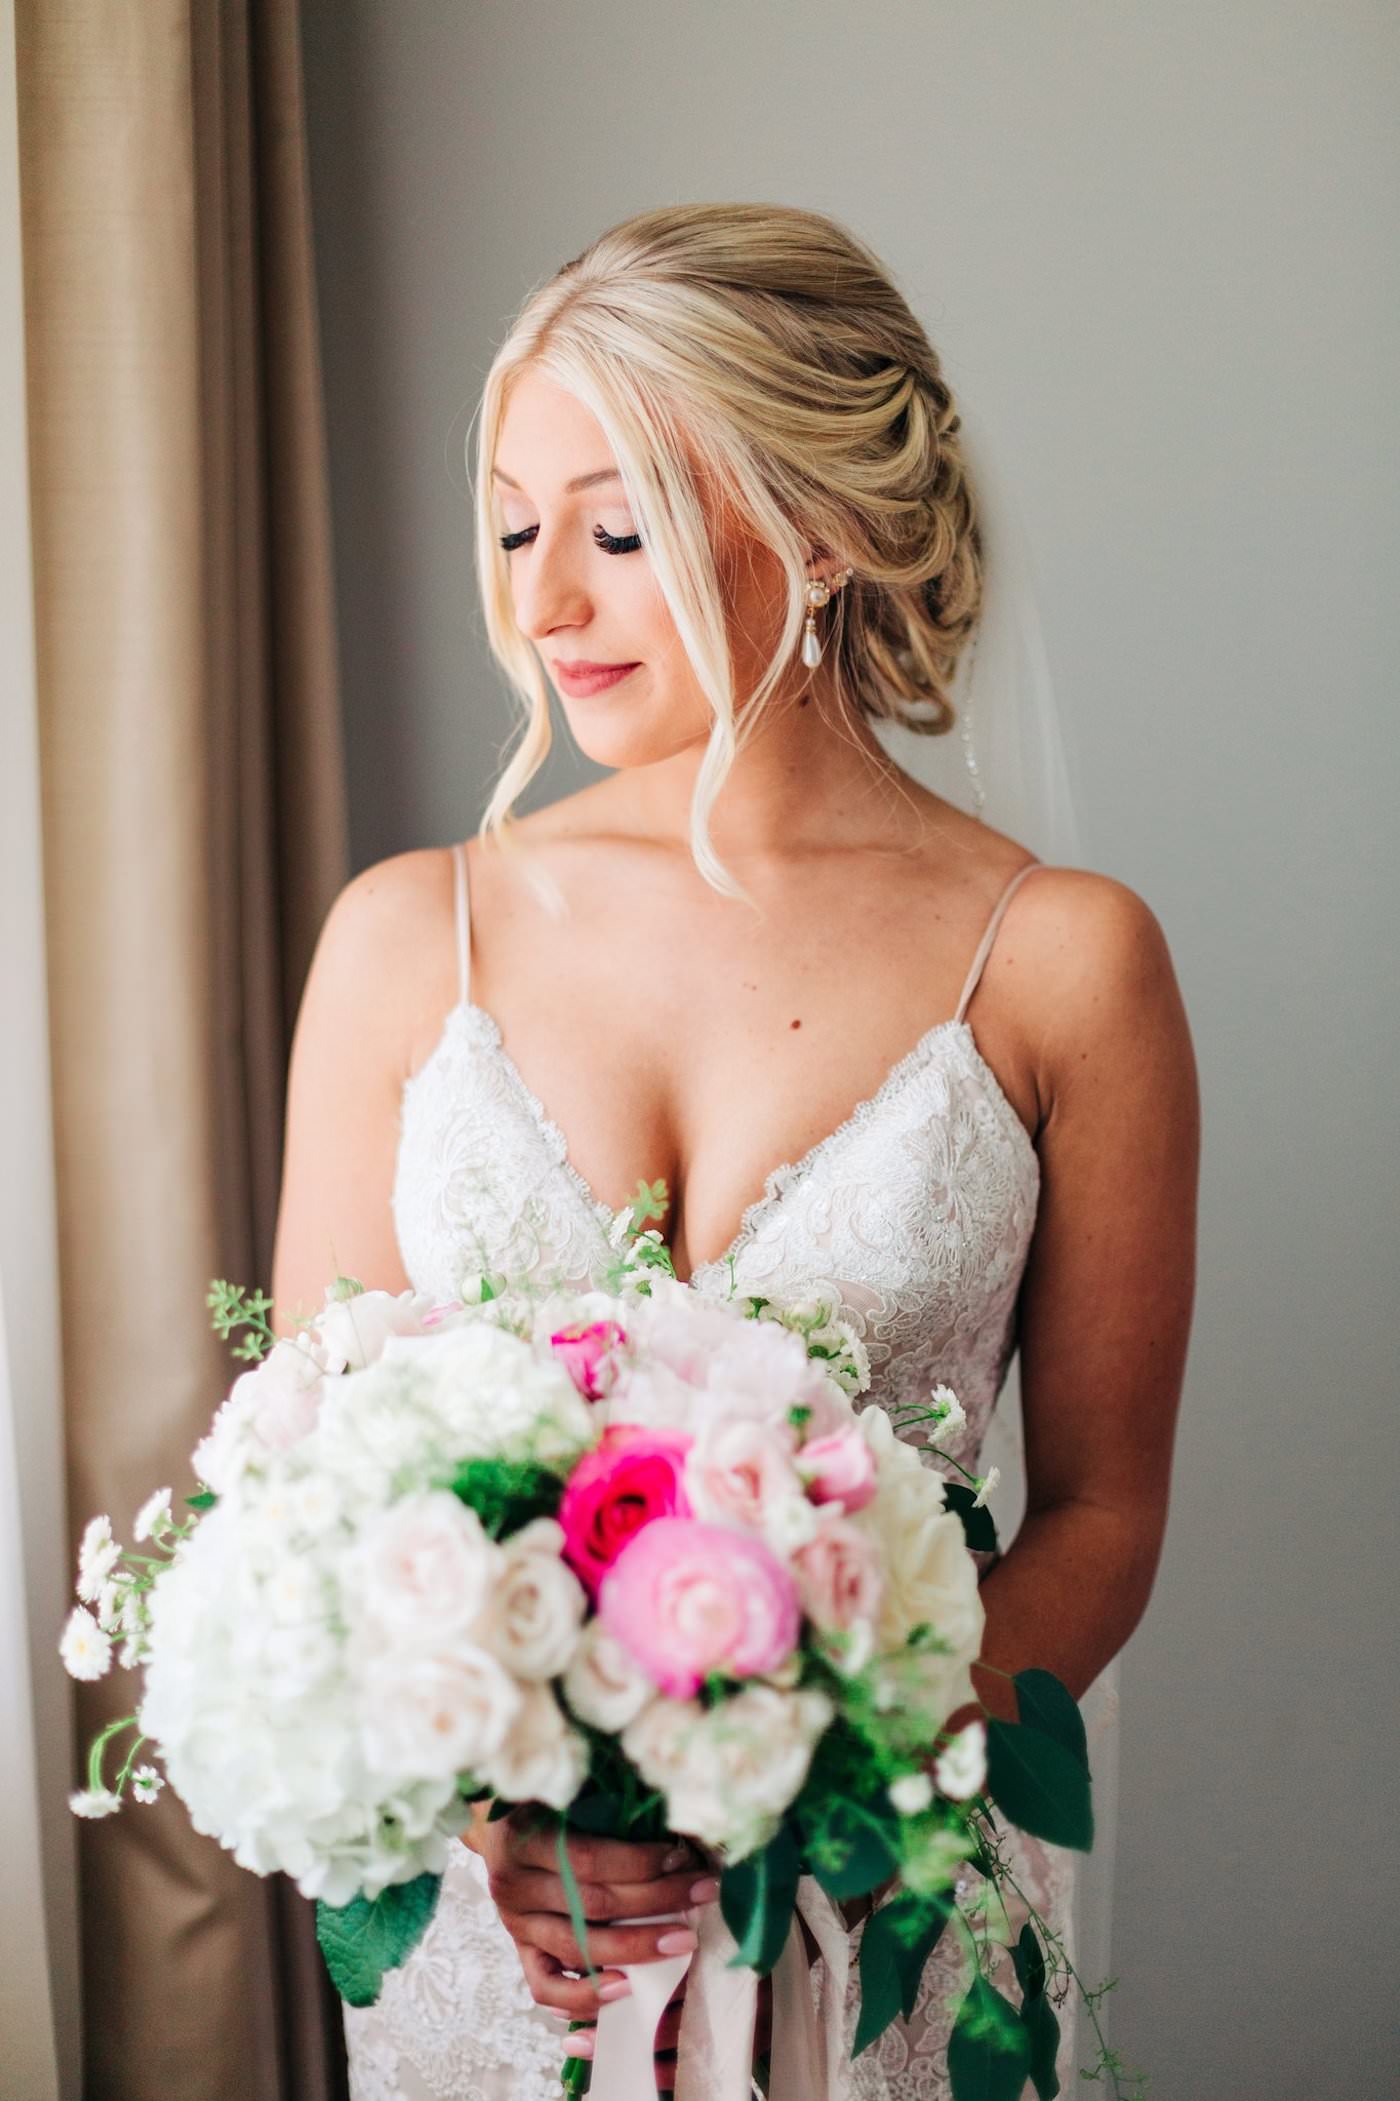 Soft Curls Chignon Updo Bride Wedding Hairstyle | Bridal Bouquet with White Hydrangea and Pink Roses with Cascading Ivy Greenery | St. Pete Wedding Hair and Makeup Femme Akoi Beauty Studio